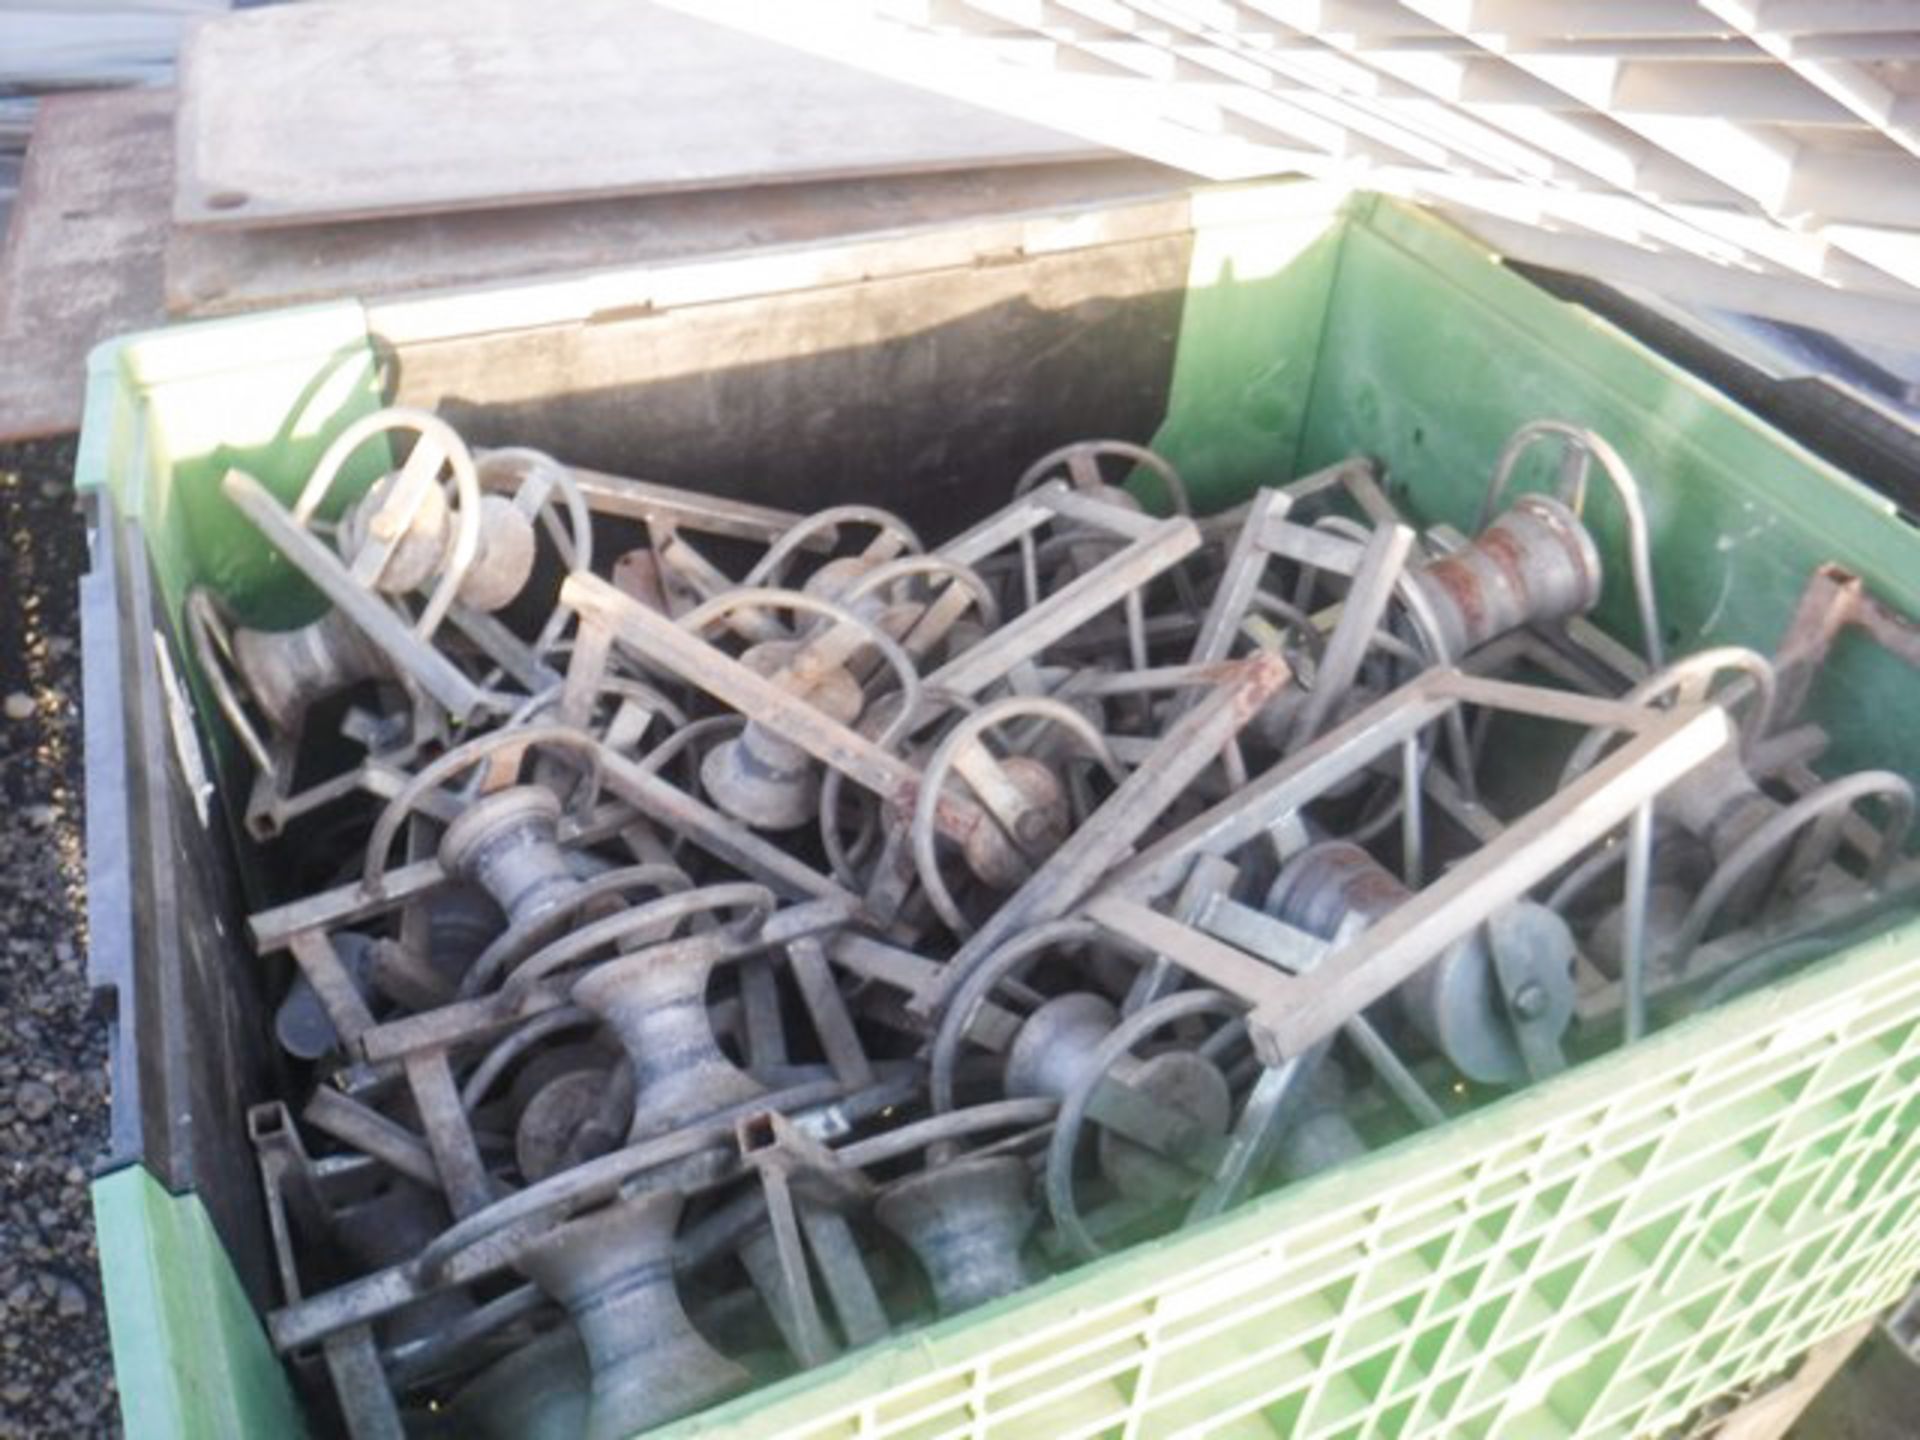 2 X STILLAGE PALLETS OF CABLE ROLLERS & 9 CABLE STOCKINGS - Image 3 of 3